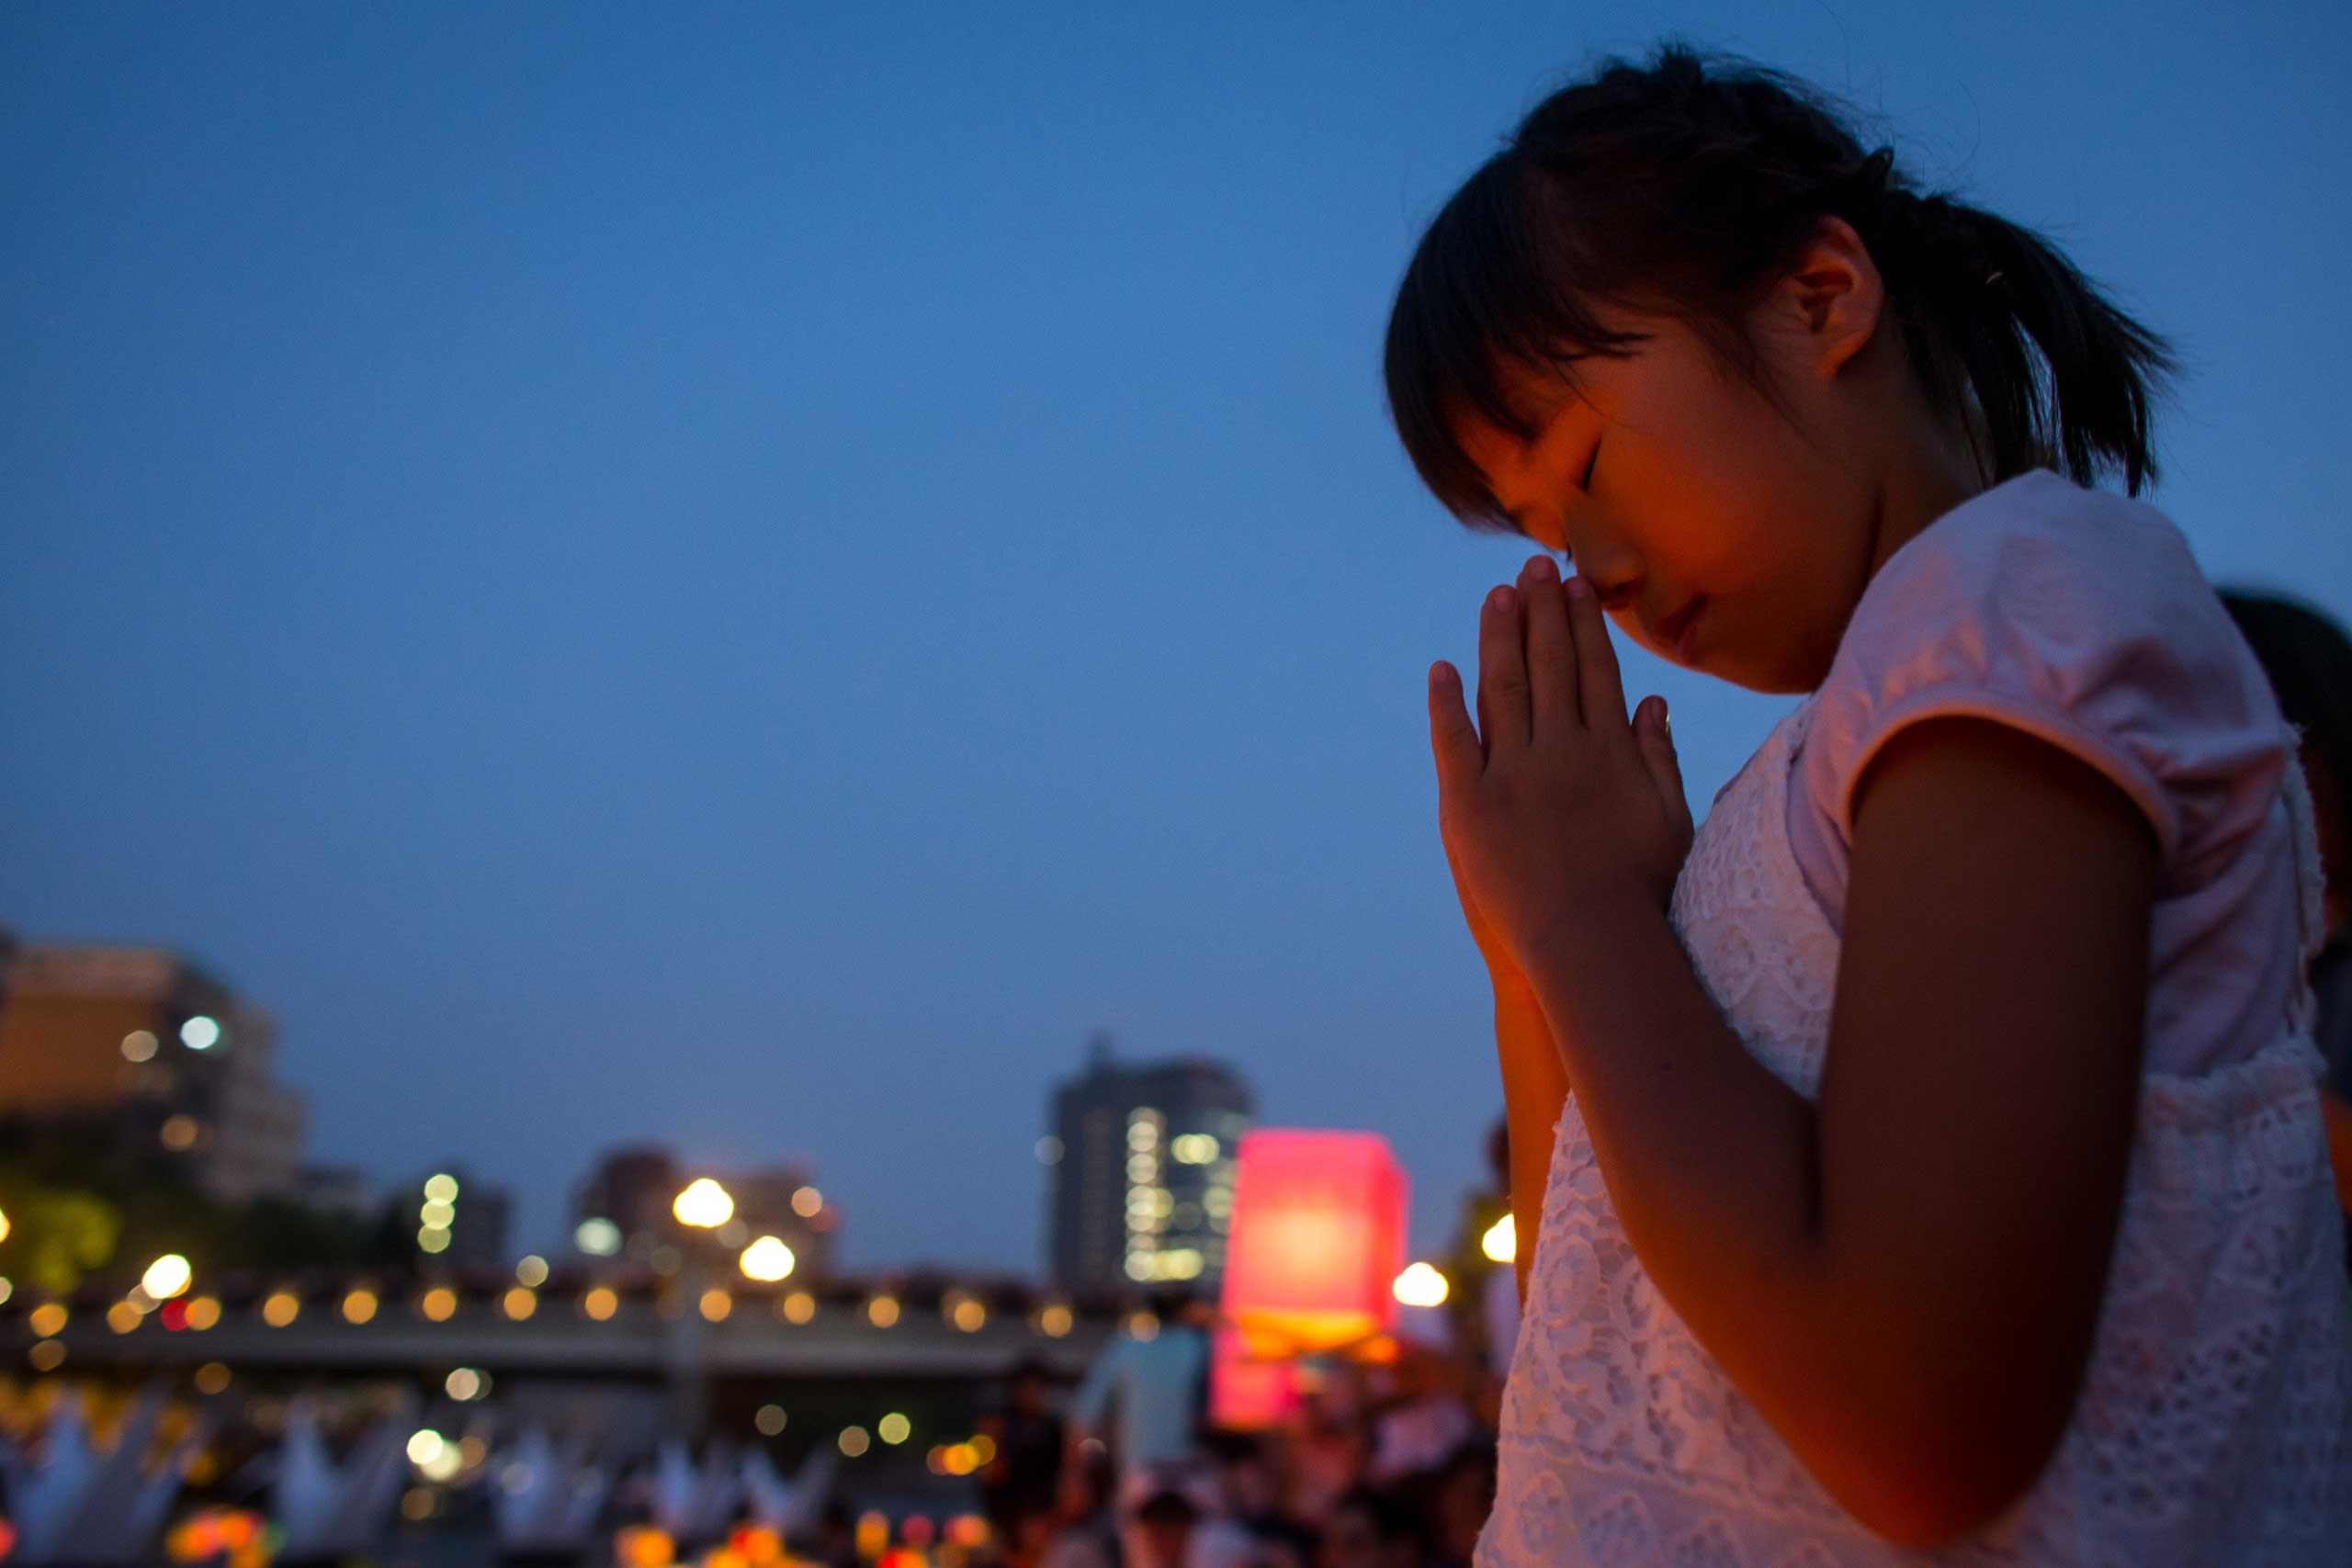 A young girl prays after floating a candle lit paper lantern on the river during 70th anniversary activities, comemorating the atomic bombing of Hiroshima at the Hiroshima Peace Memorial Park, on Aug. 6, 2015